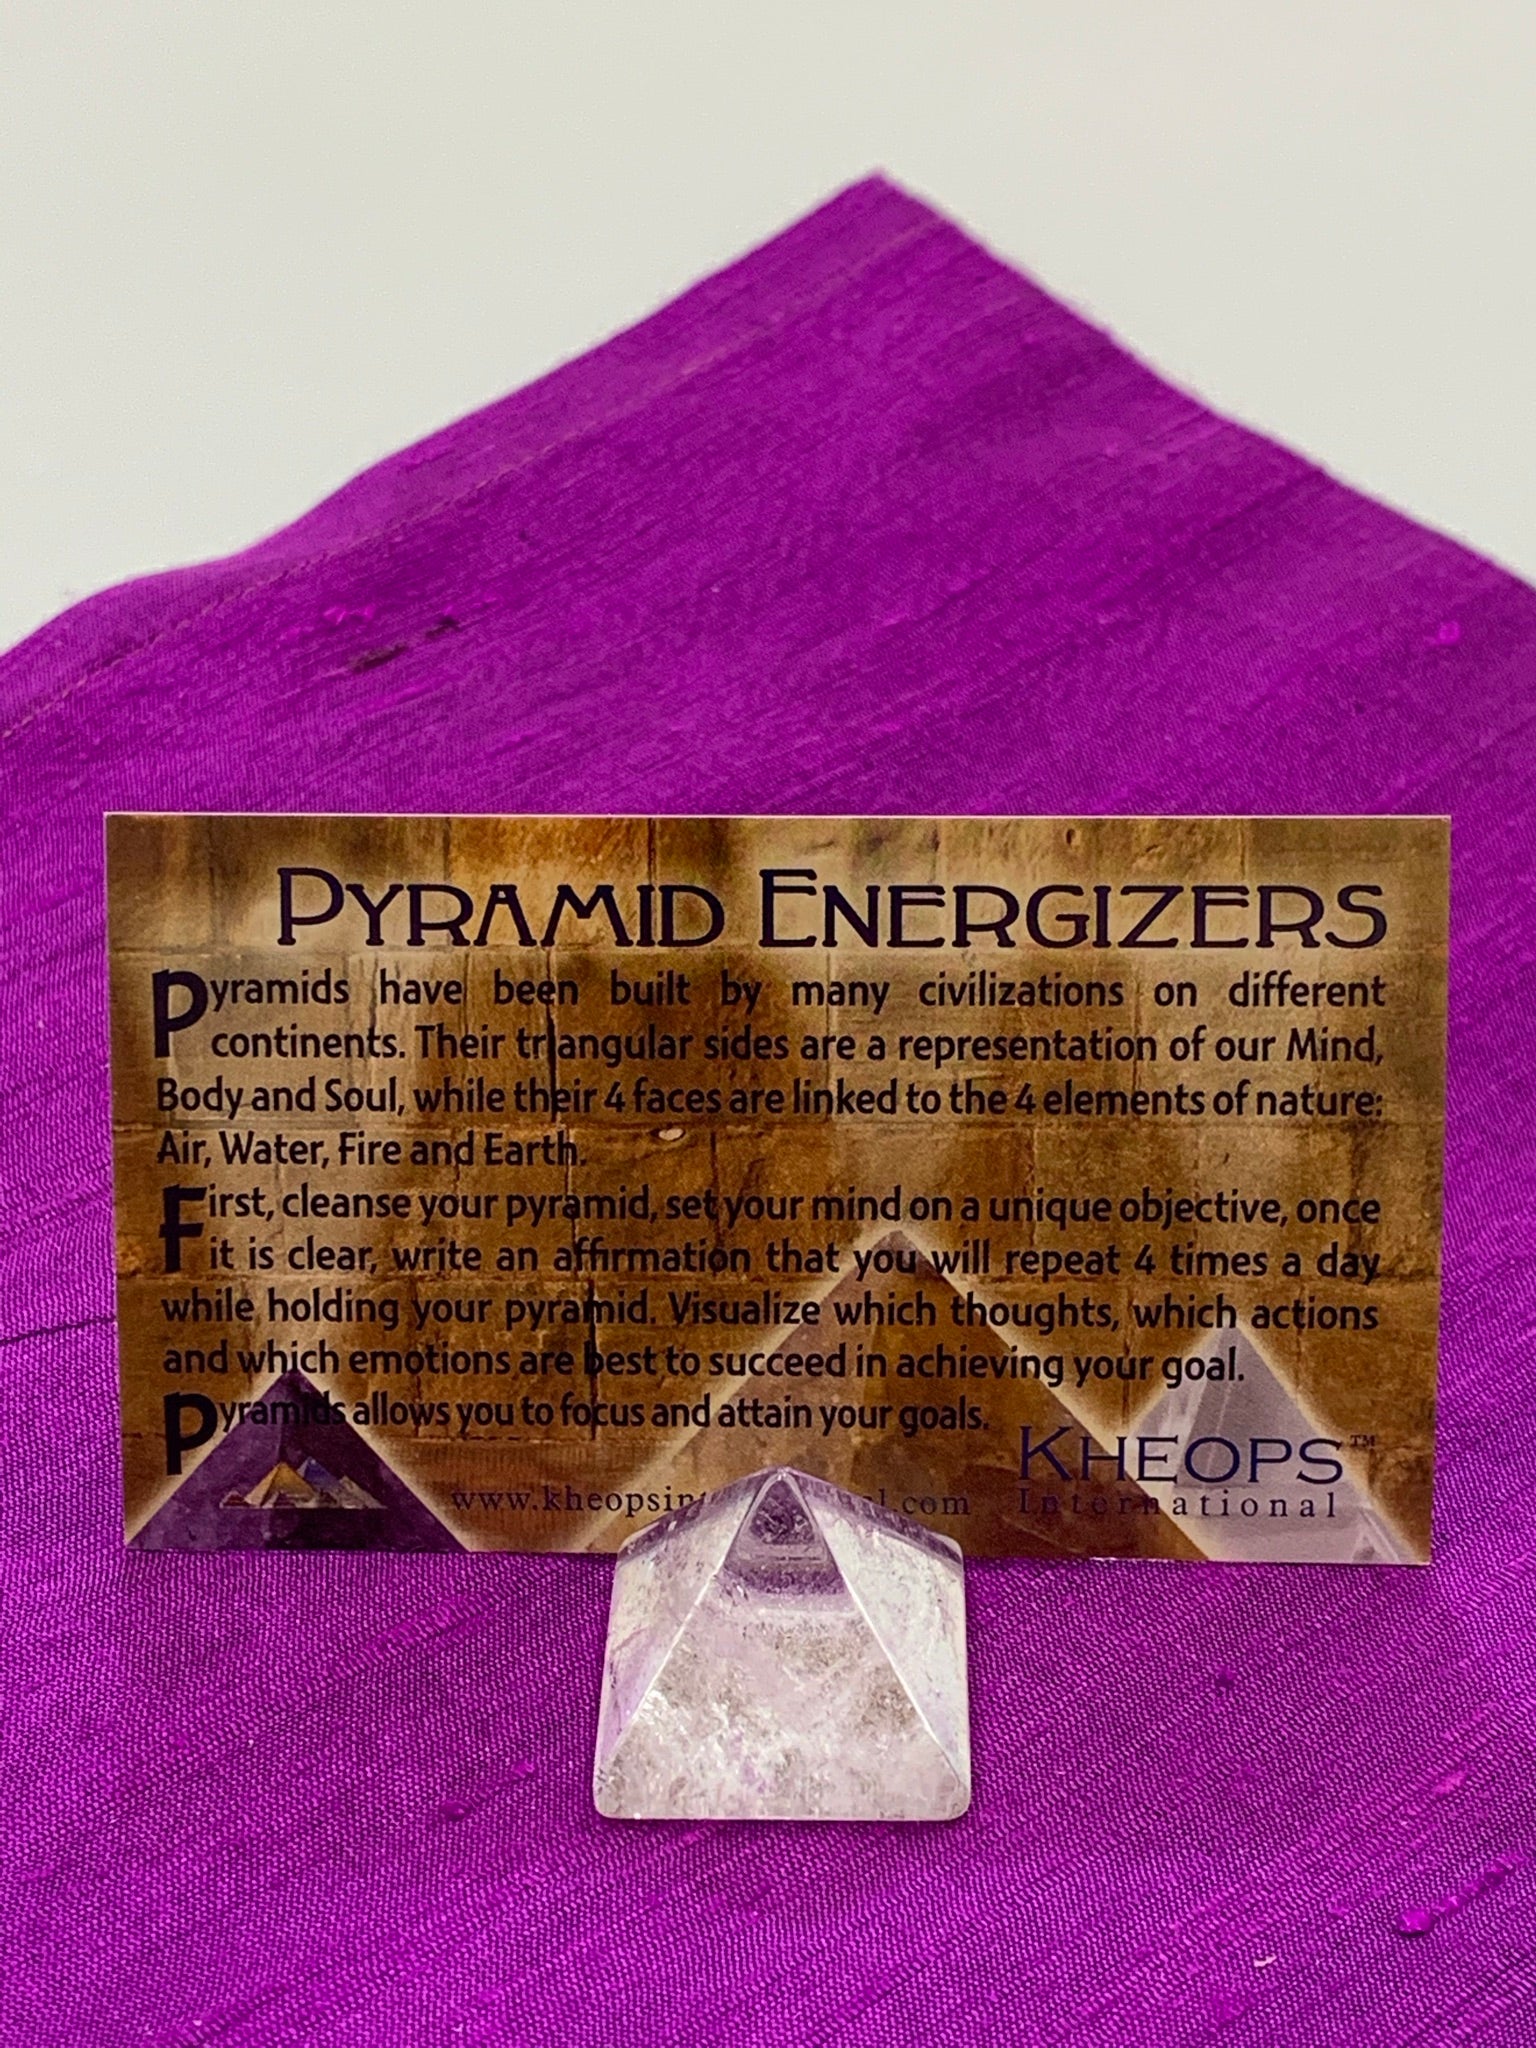 This is a photo of the informational and instructional card that comes with the pyramid. 